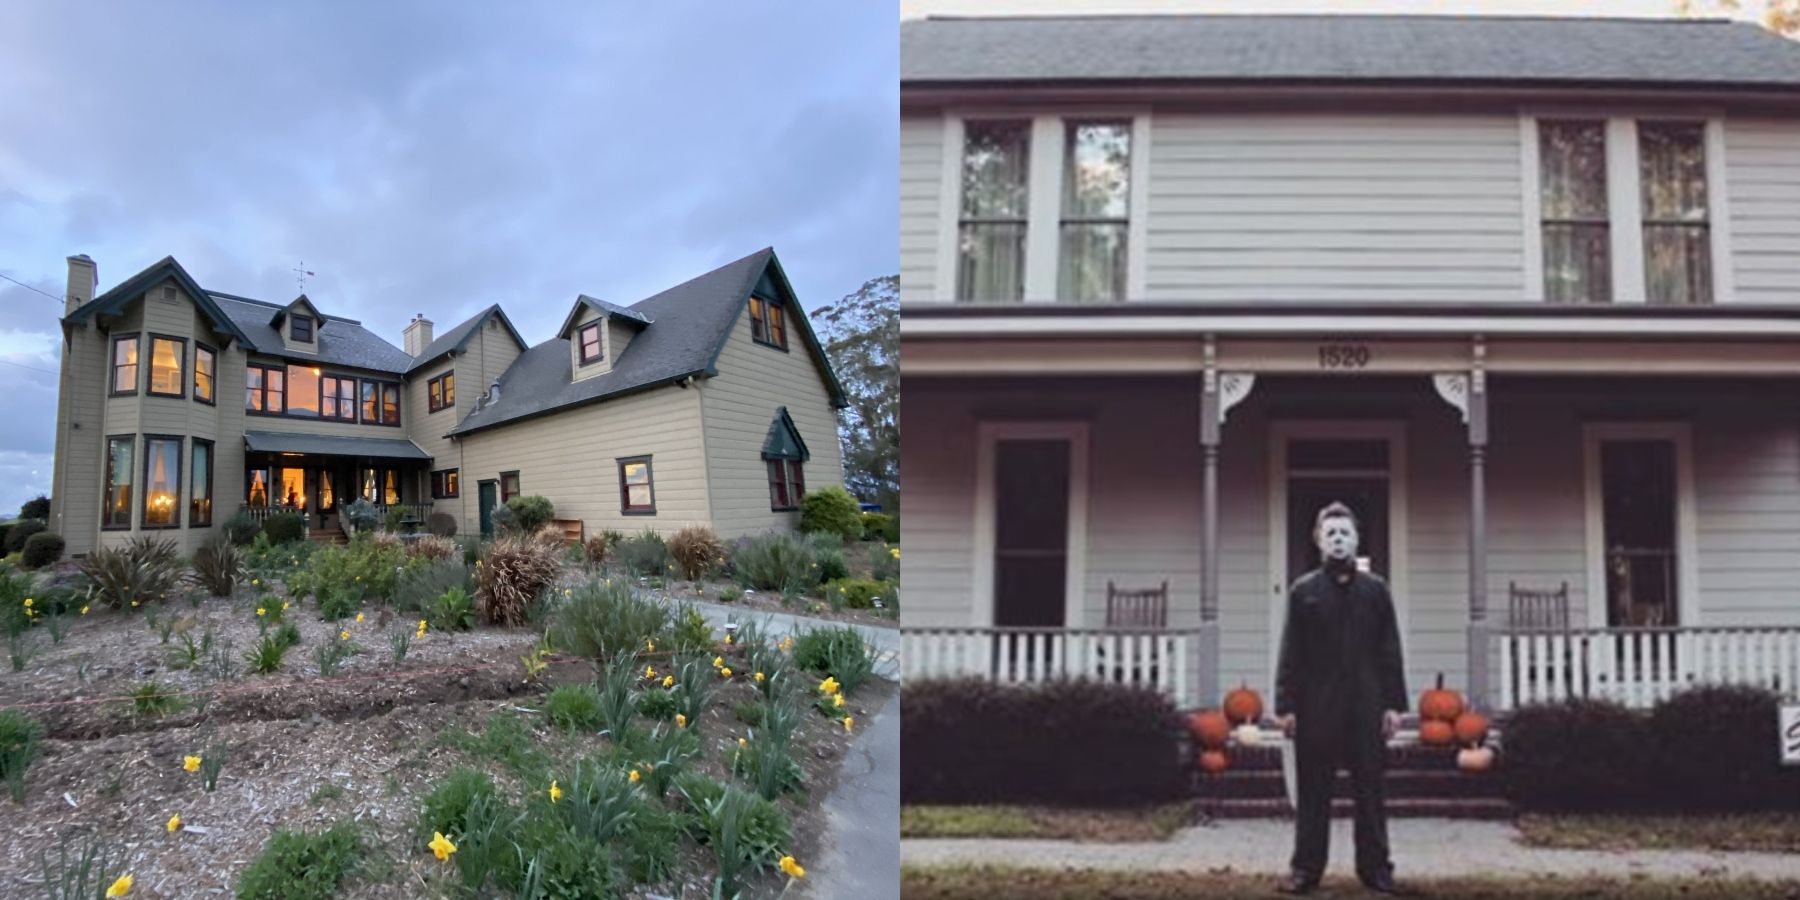 Split image of the houses in Scream and Halloween